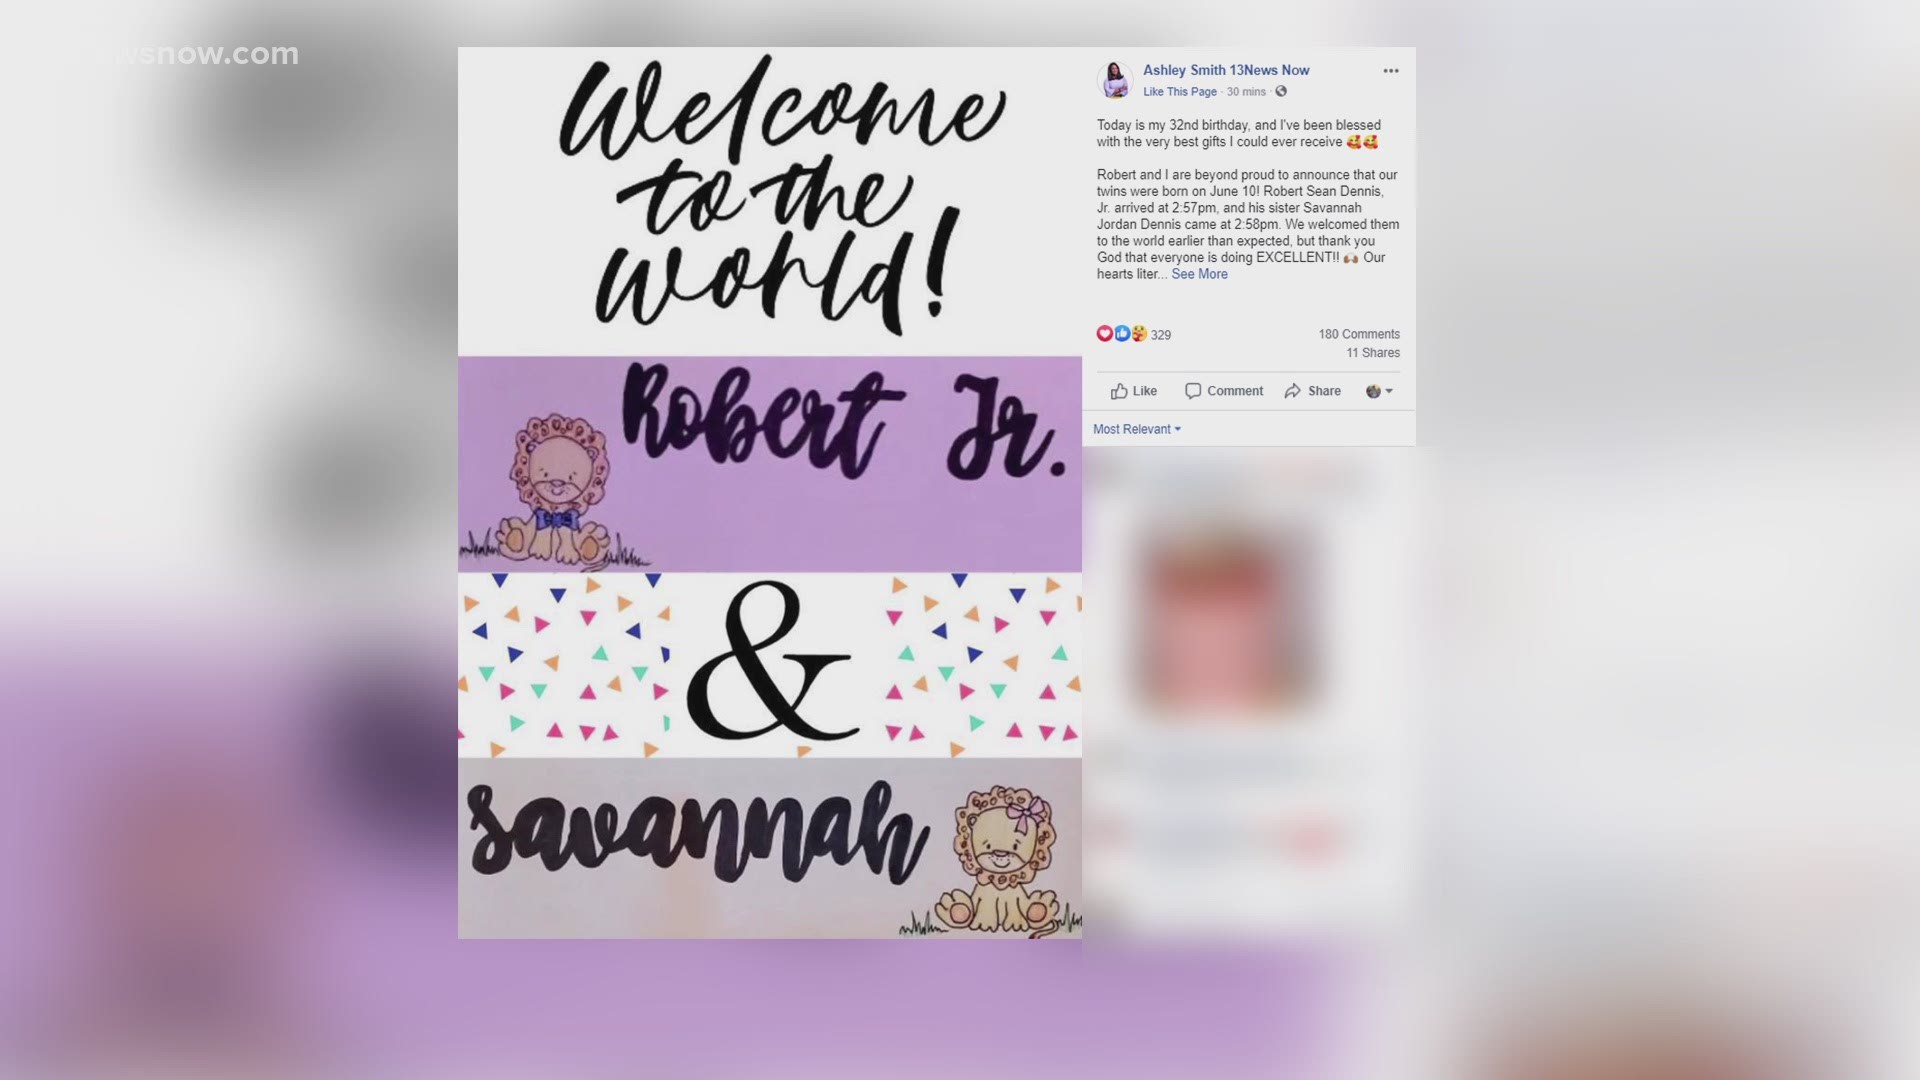 Ashley Smith welcomed her twins into the world on June 10 - first, a son named Robert Sean, Jr., and then a daughter named Savannah Jordan. Congratulations!